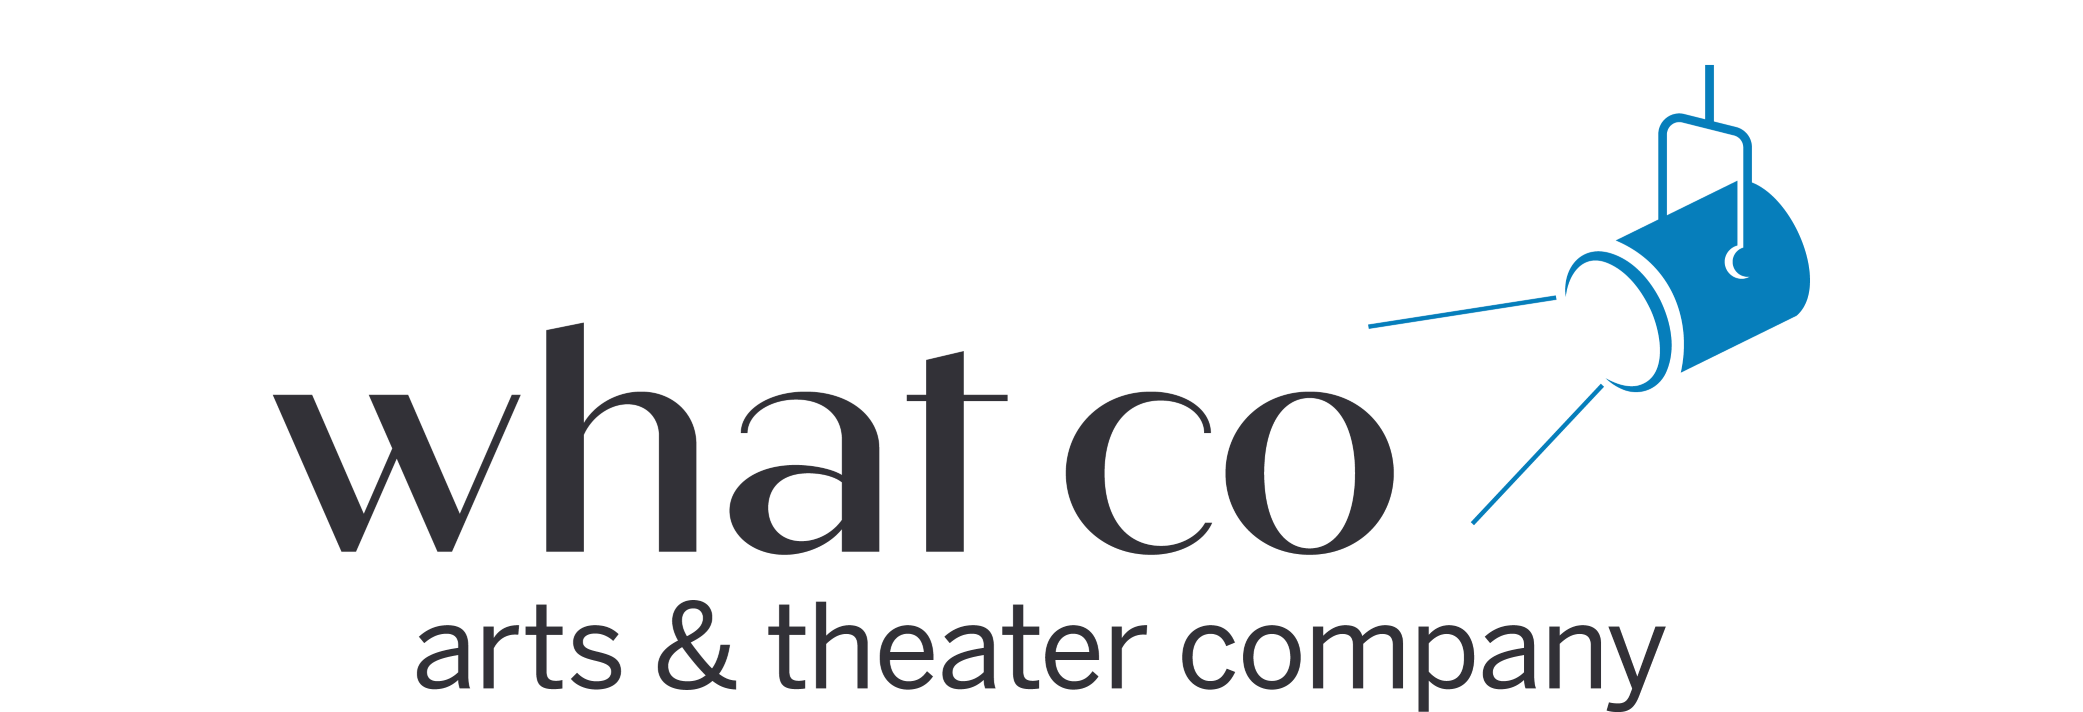 West Hudson Arts & Theater Company